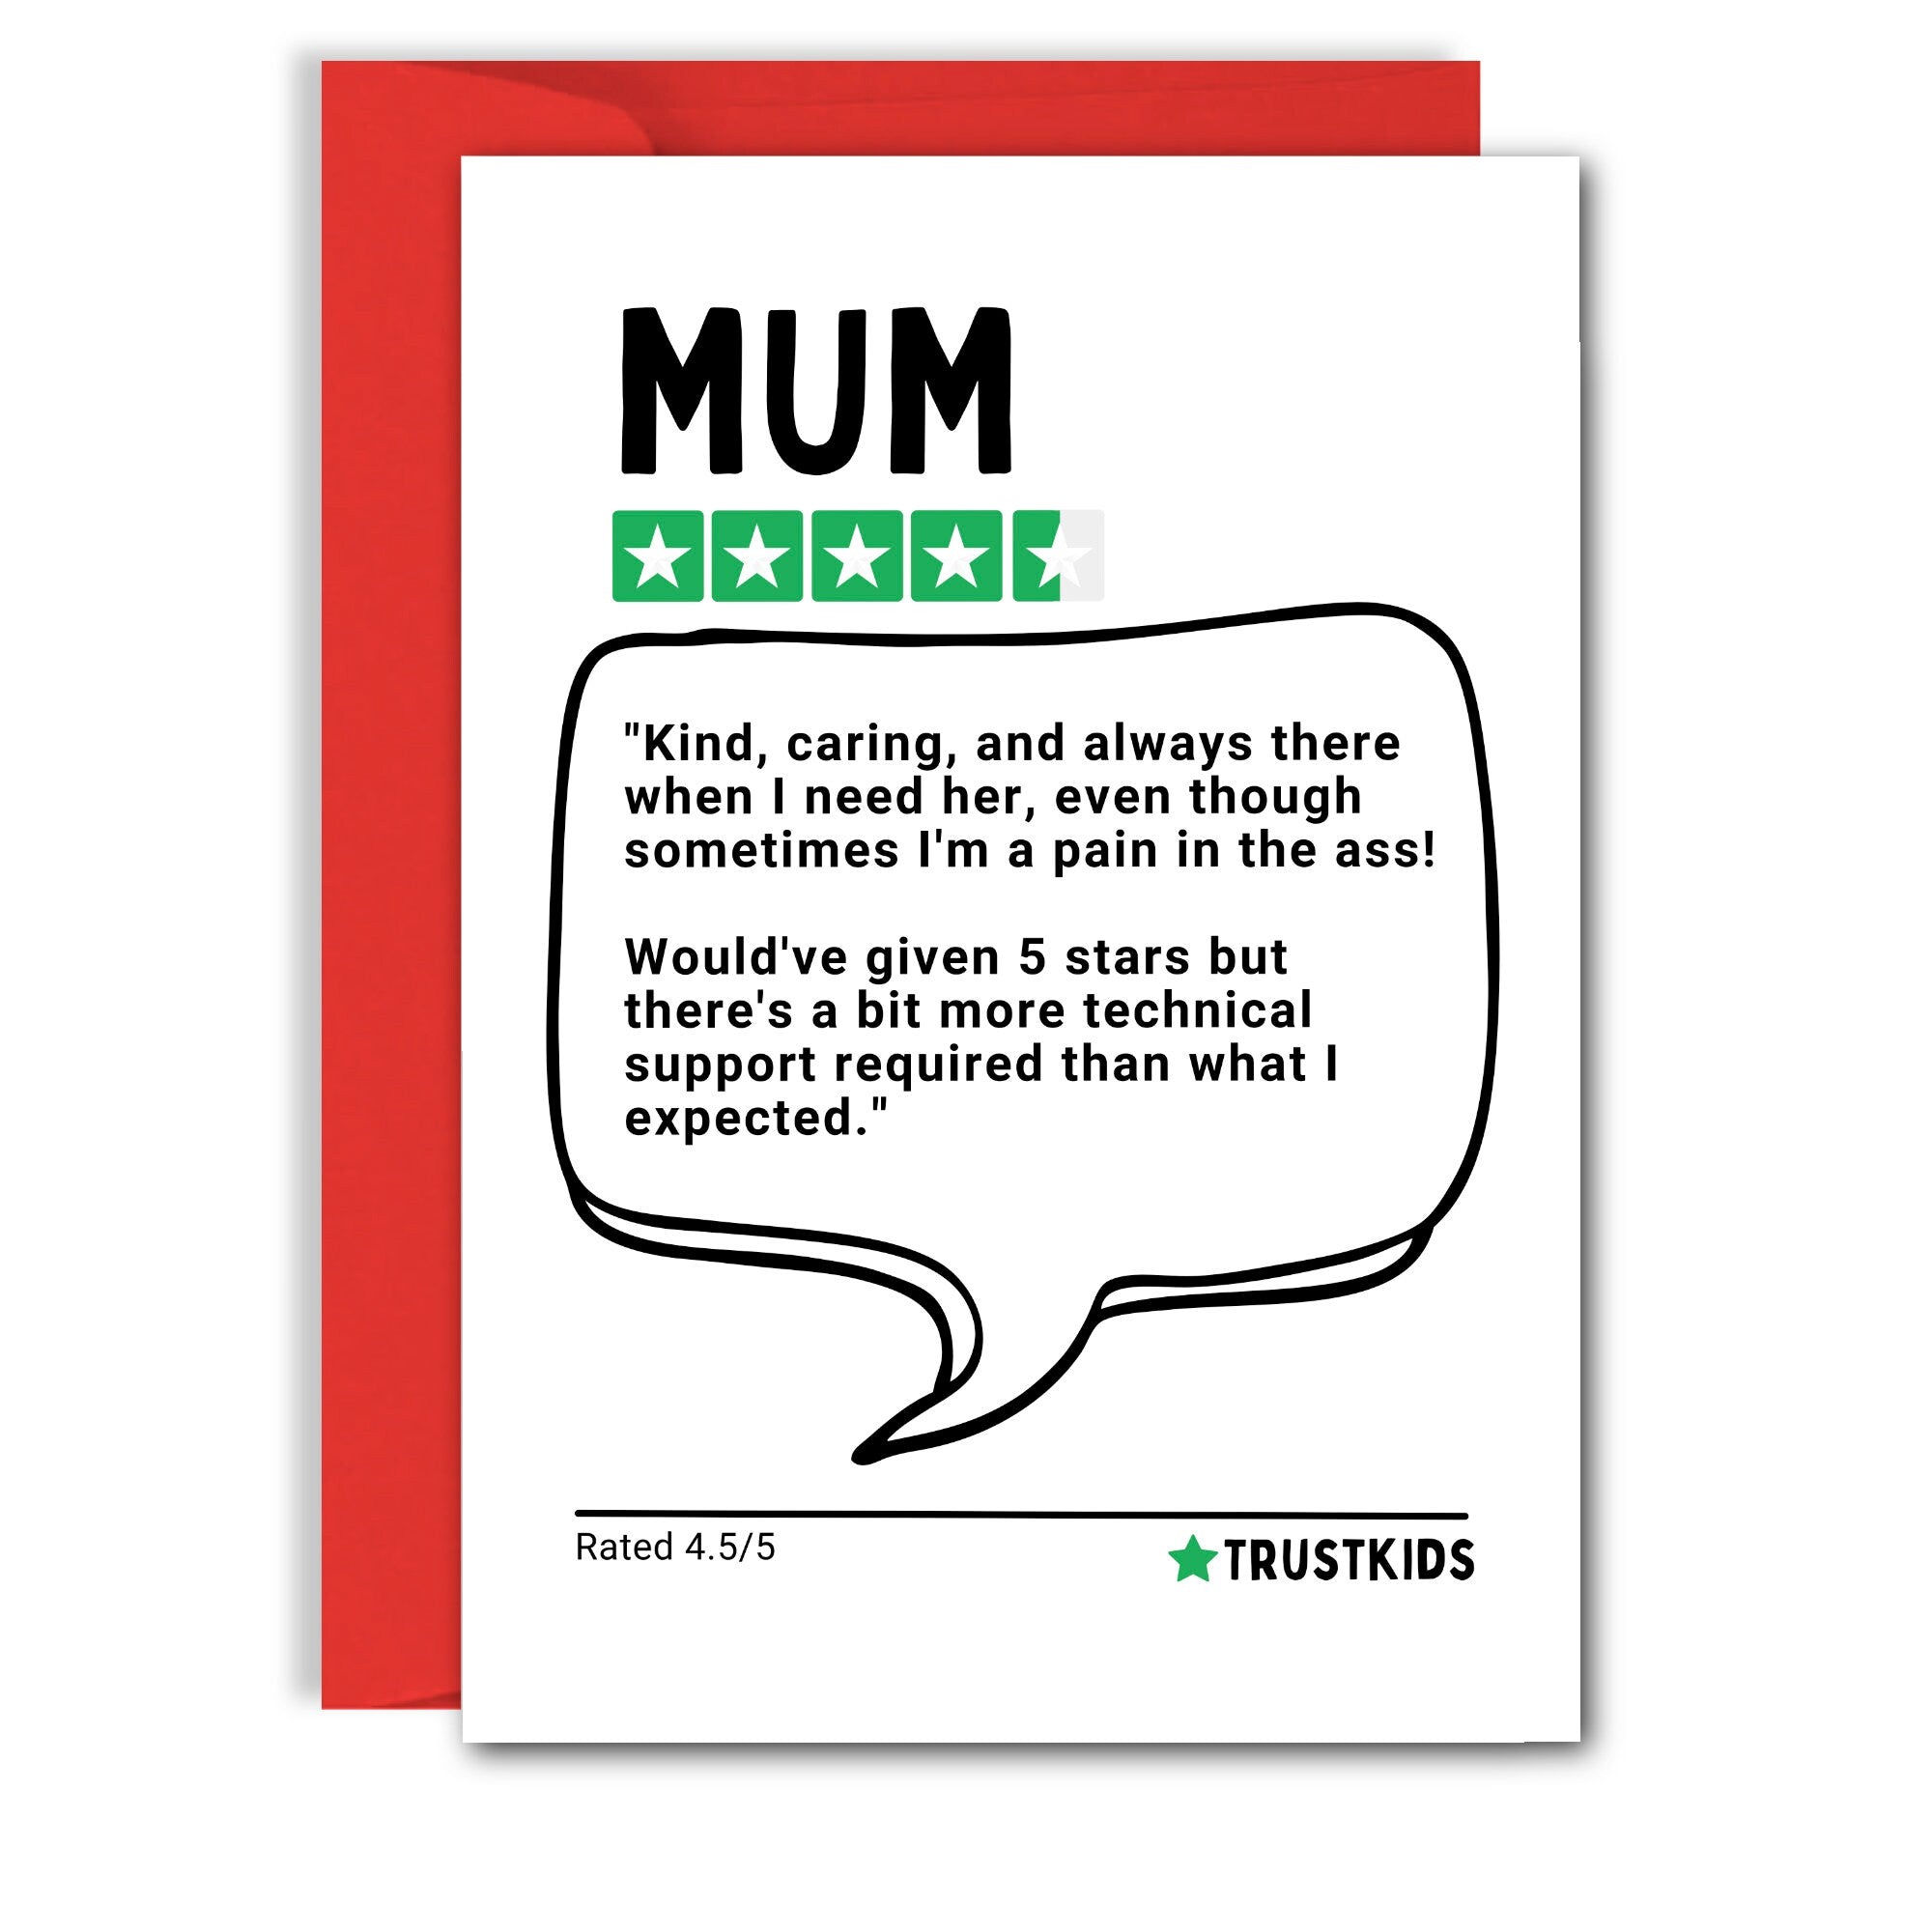 Funny Birthday Card for Mum, Product Star Rating Review, Funny Mum Birthday Card, Mum Birthday Card